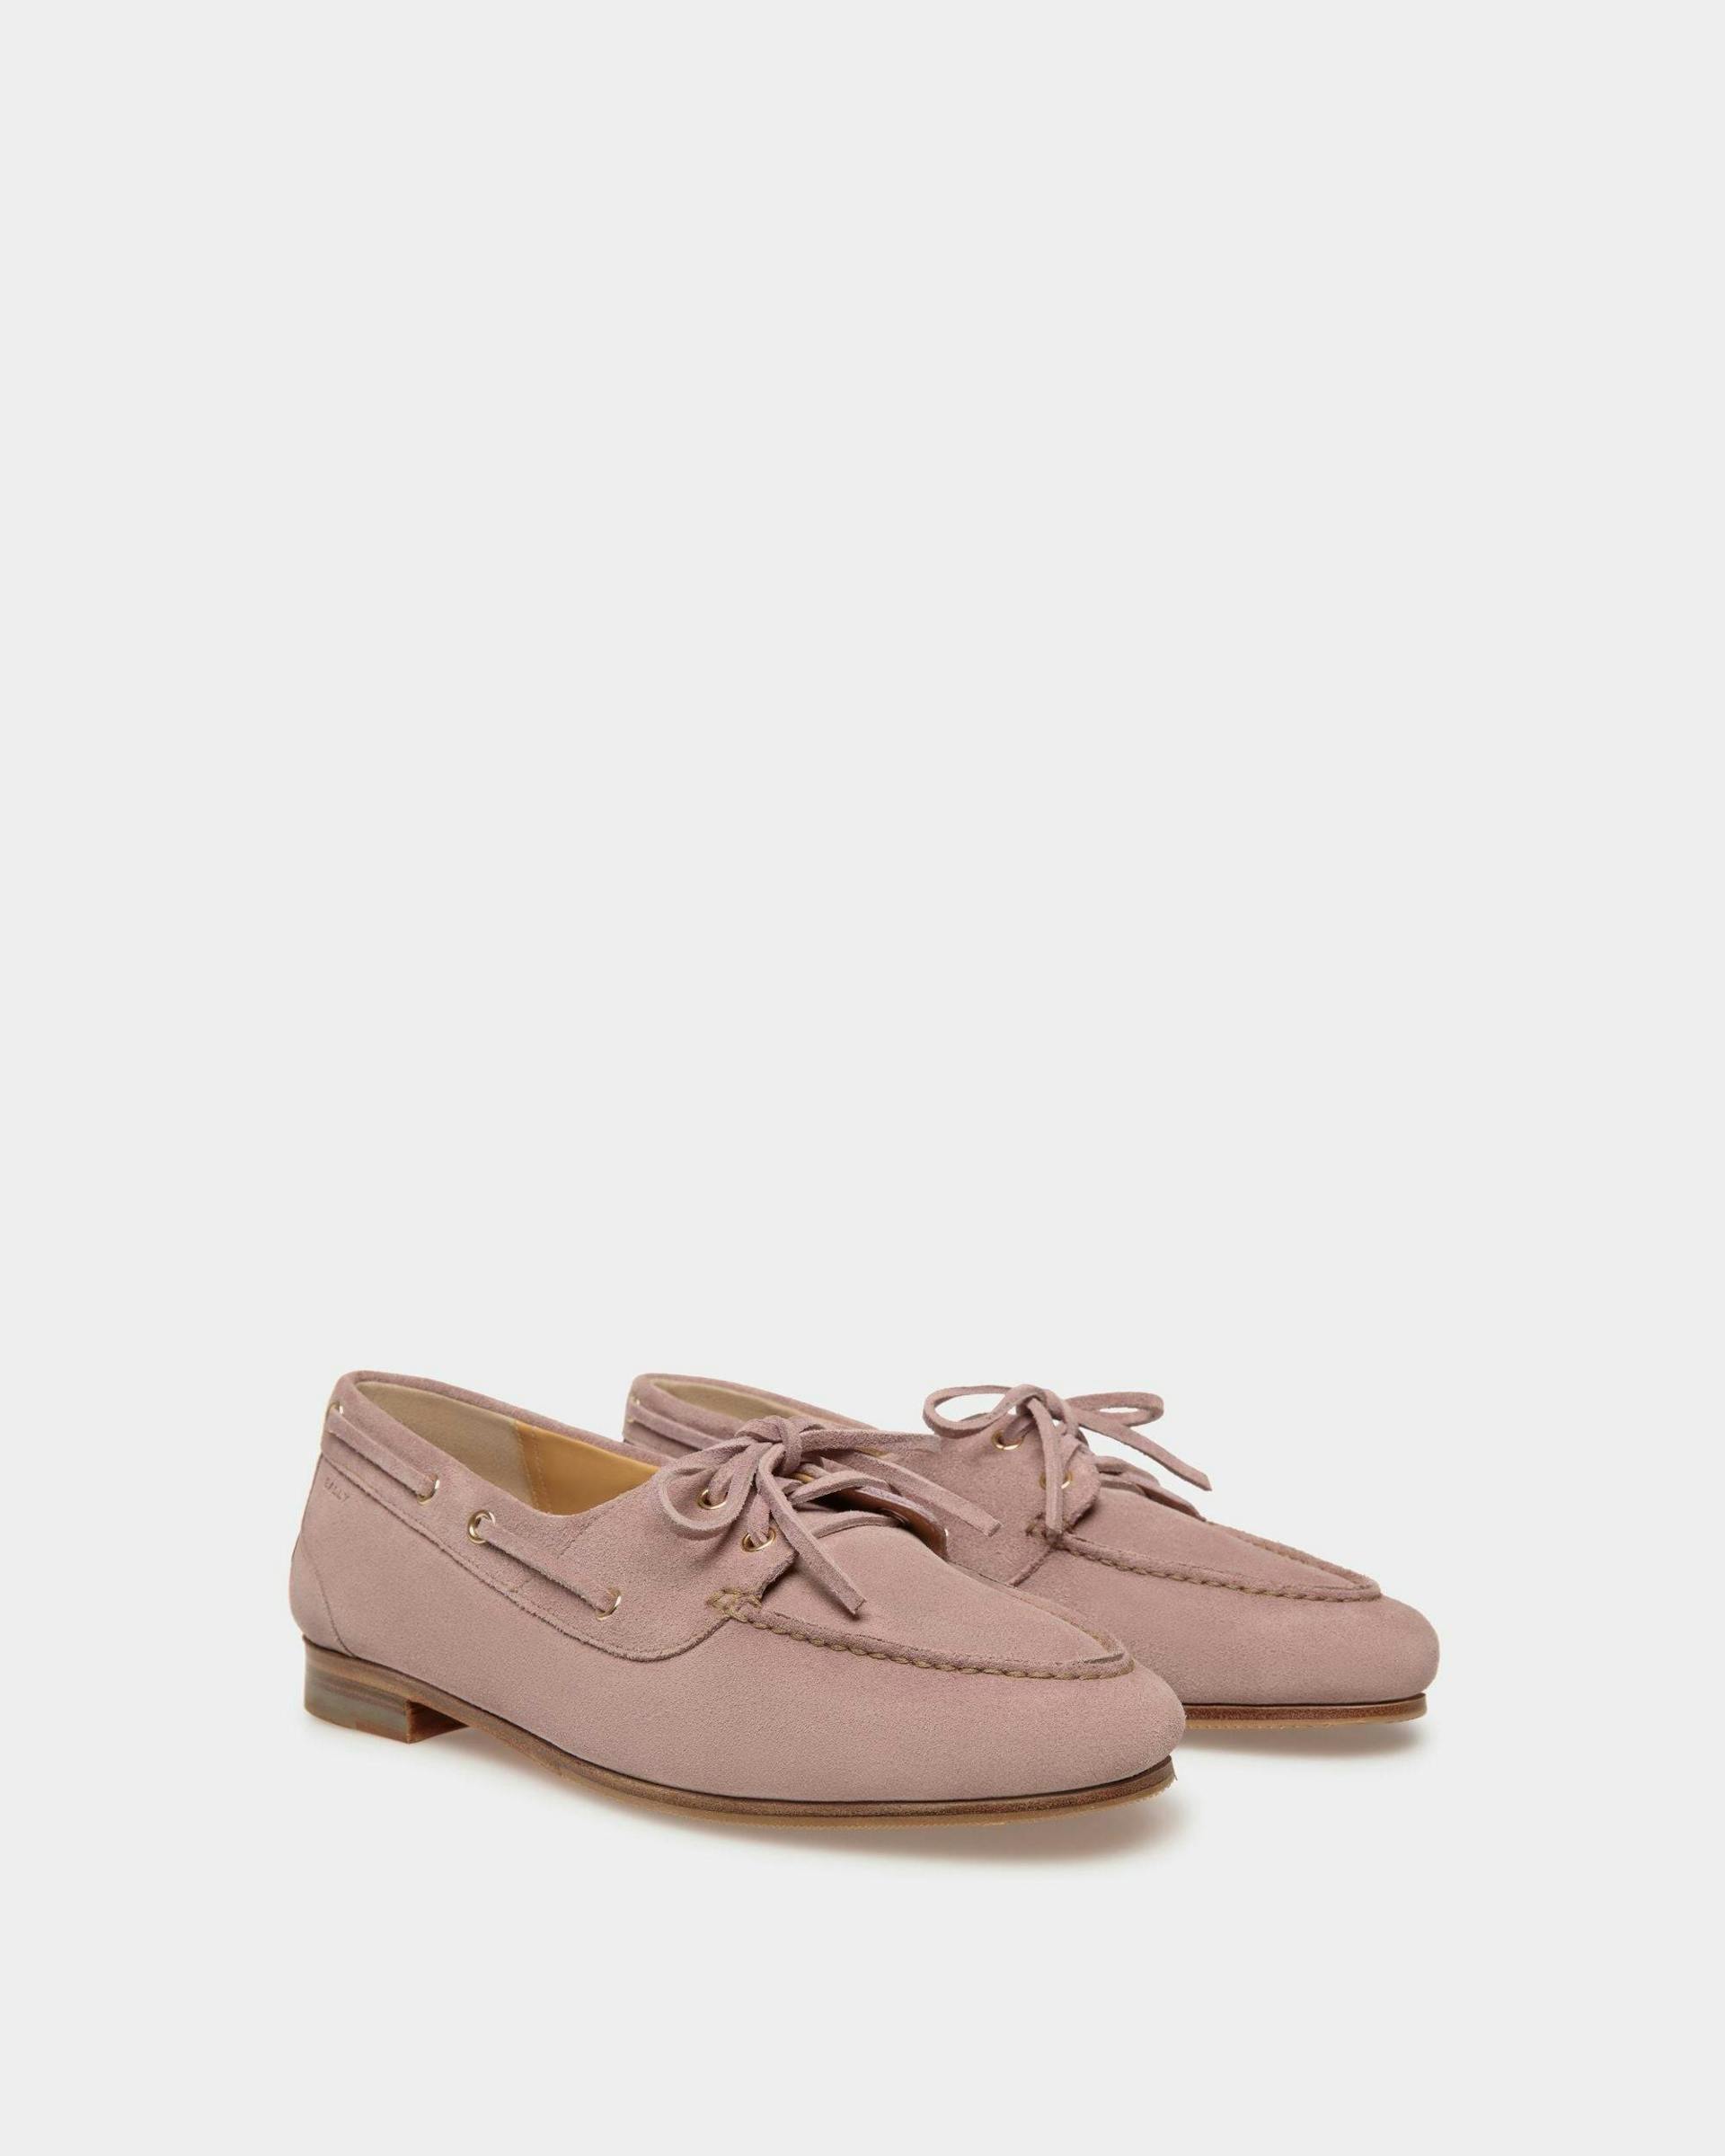 Women's Plume Moccasin in Light Mauve Suede | Bally | Still Life 3/4 Front